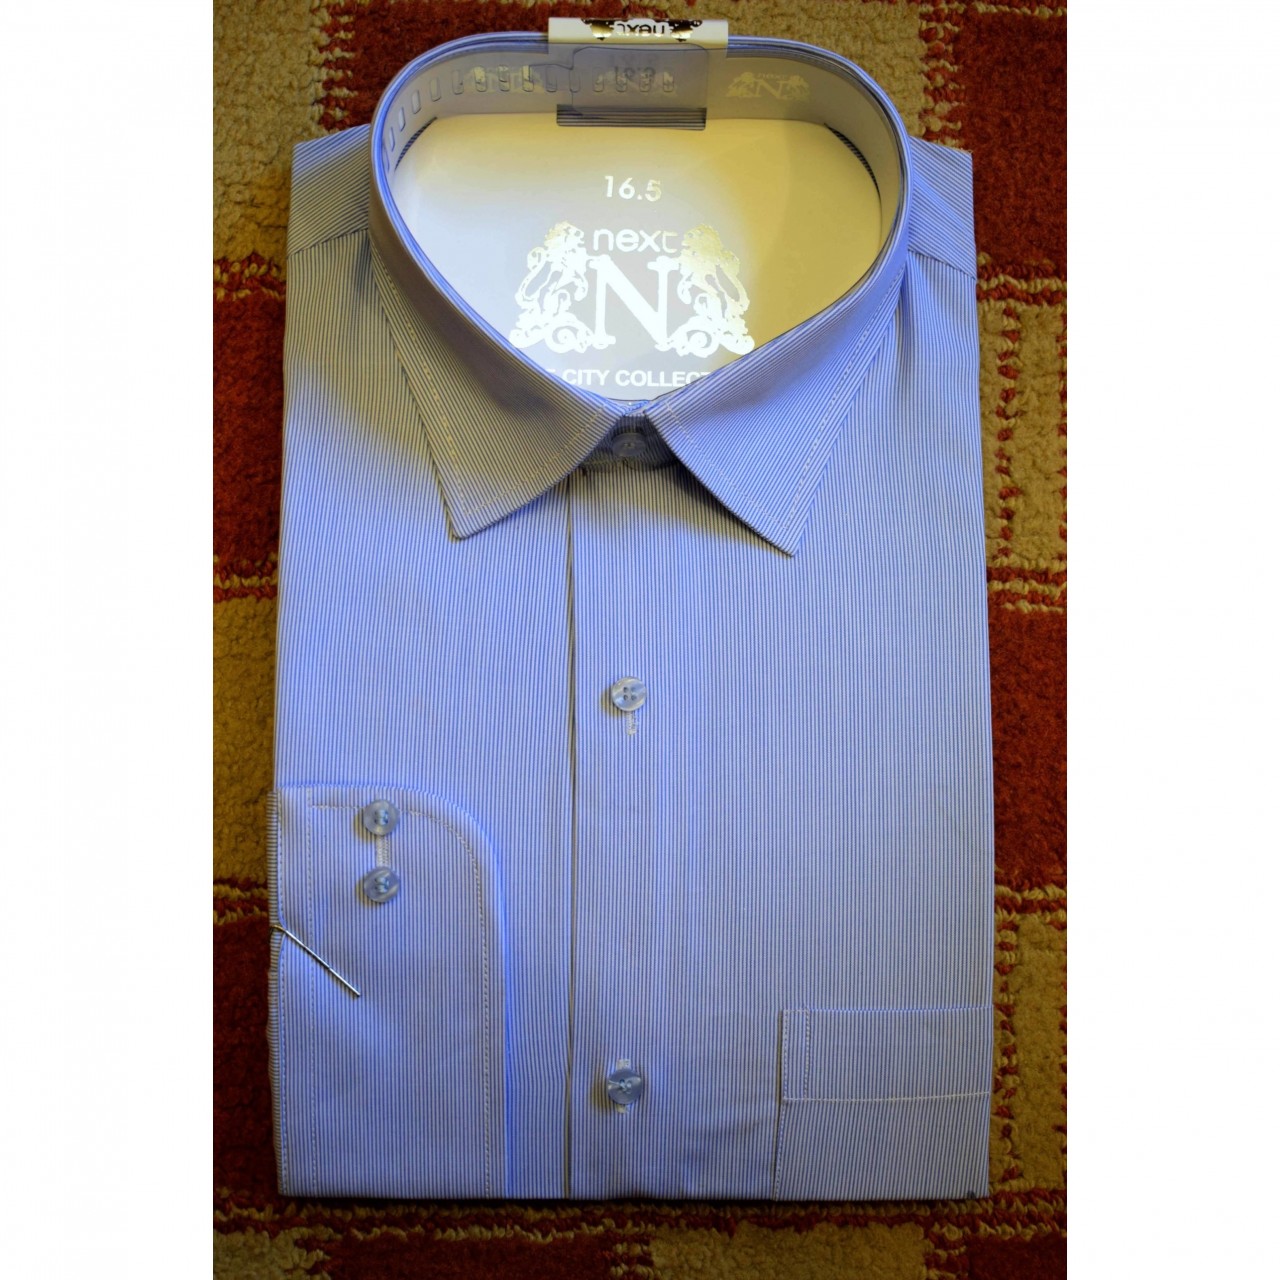 Pin Stripes Formal Shirt For Men - Double Needle Stitching - Sky Blue